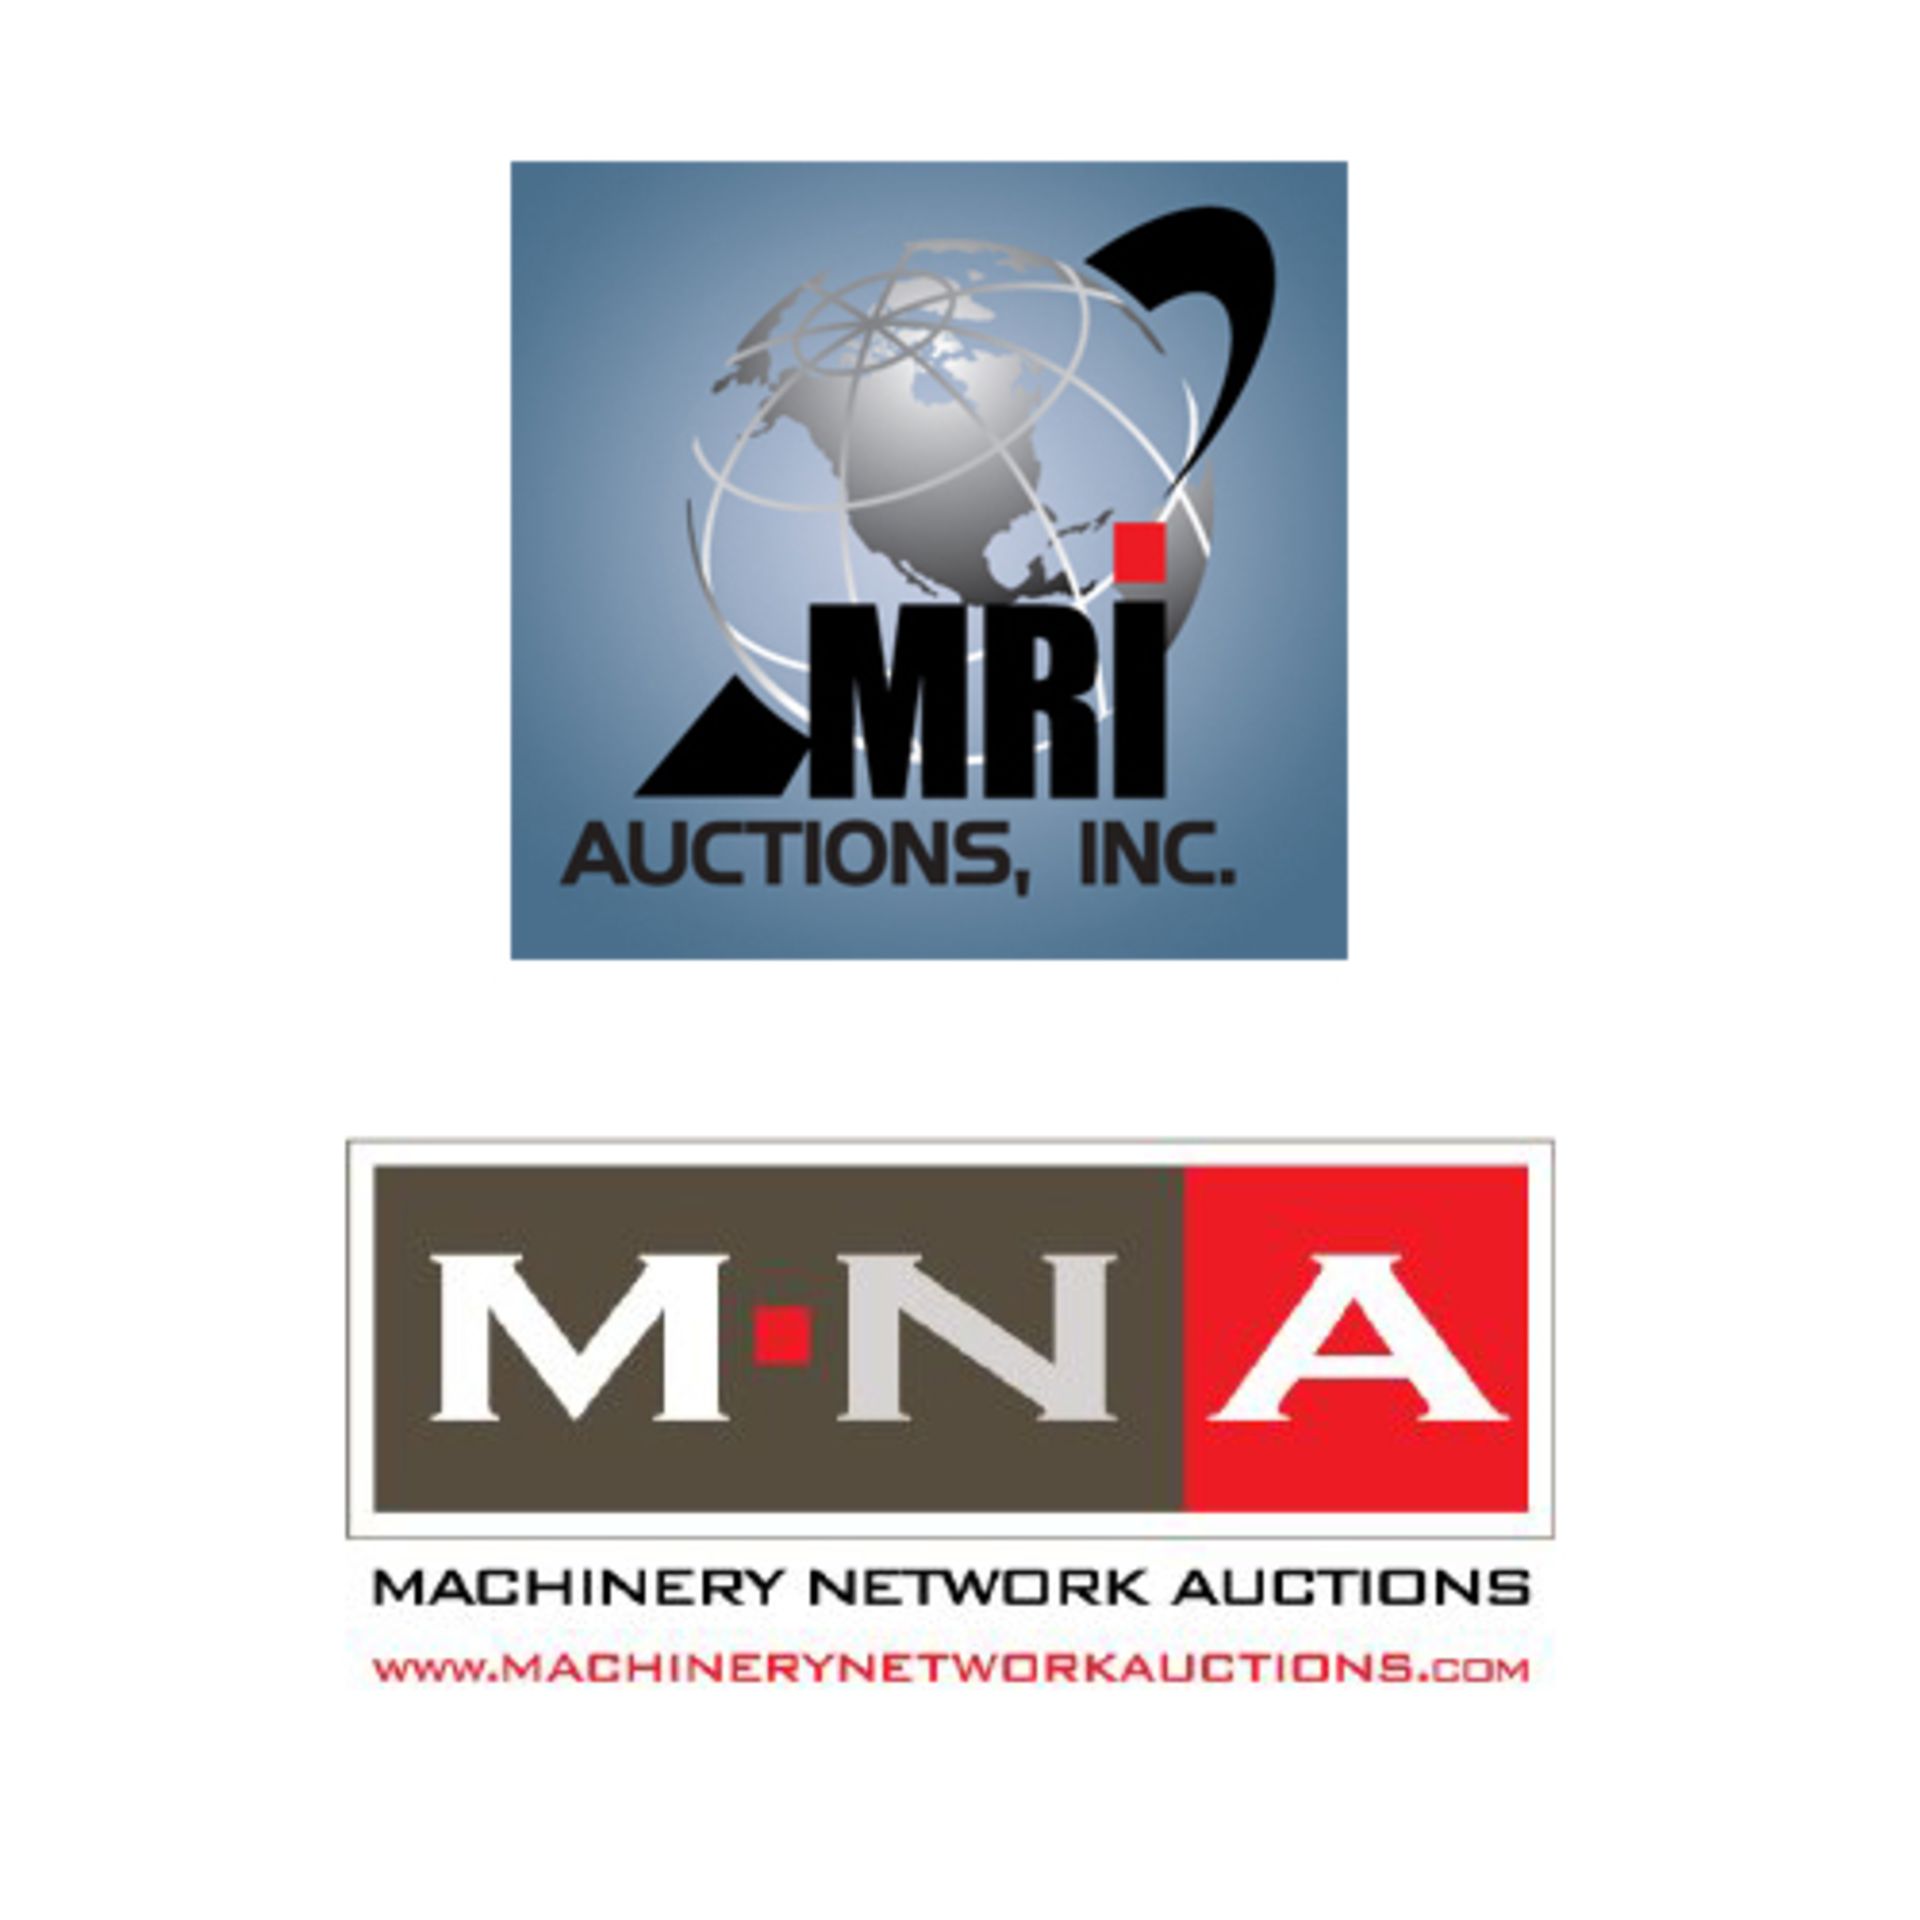 THIS SALE IS IN CONJUNCTION WITH MACHINERY NETWORK AUCTIONS